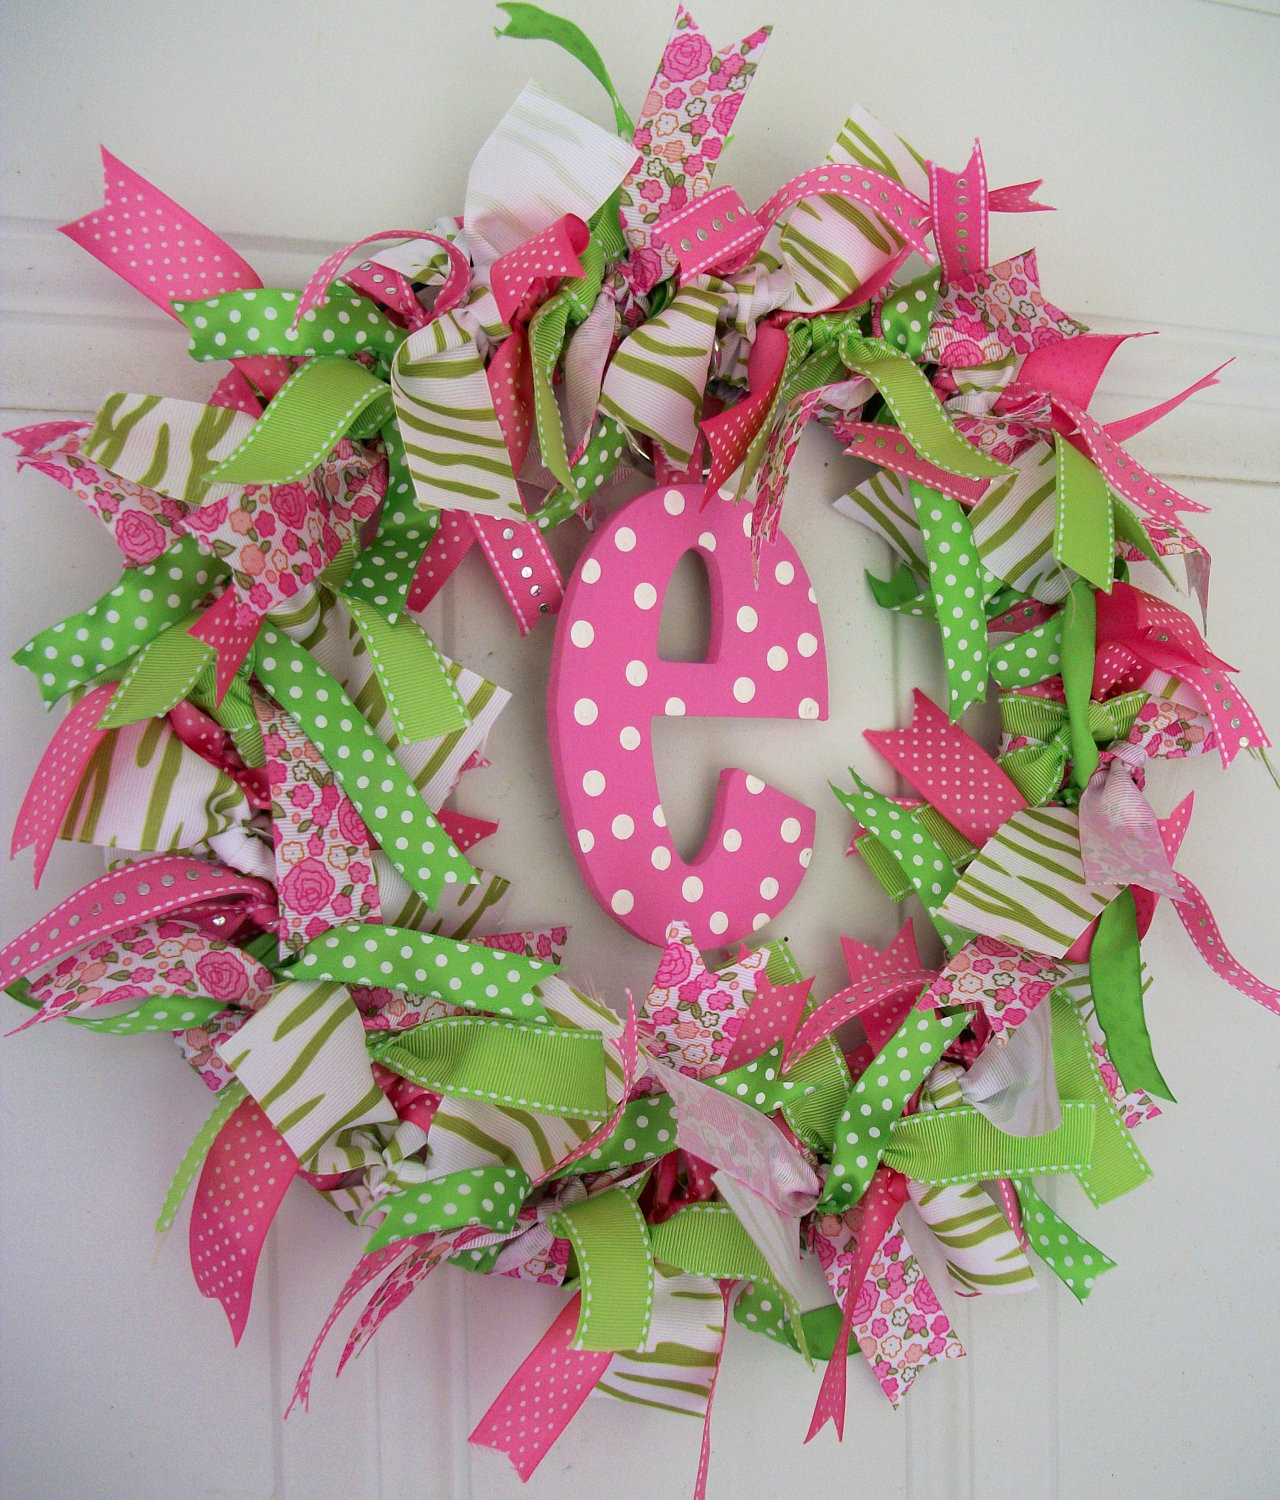 DIY Christmas Wreaths With Ribbon
 Wreaths What Should Be My First DIY MomSpotted